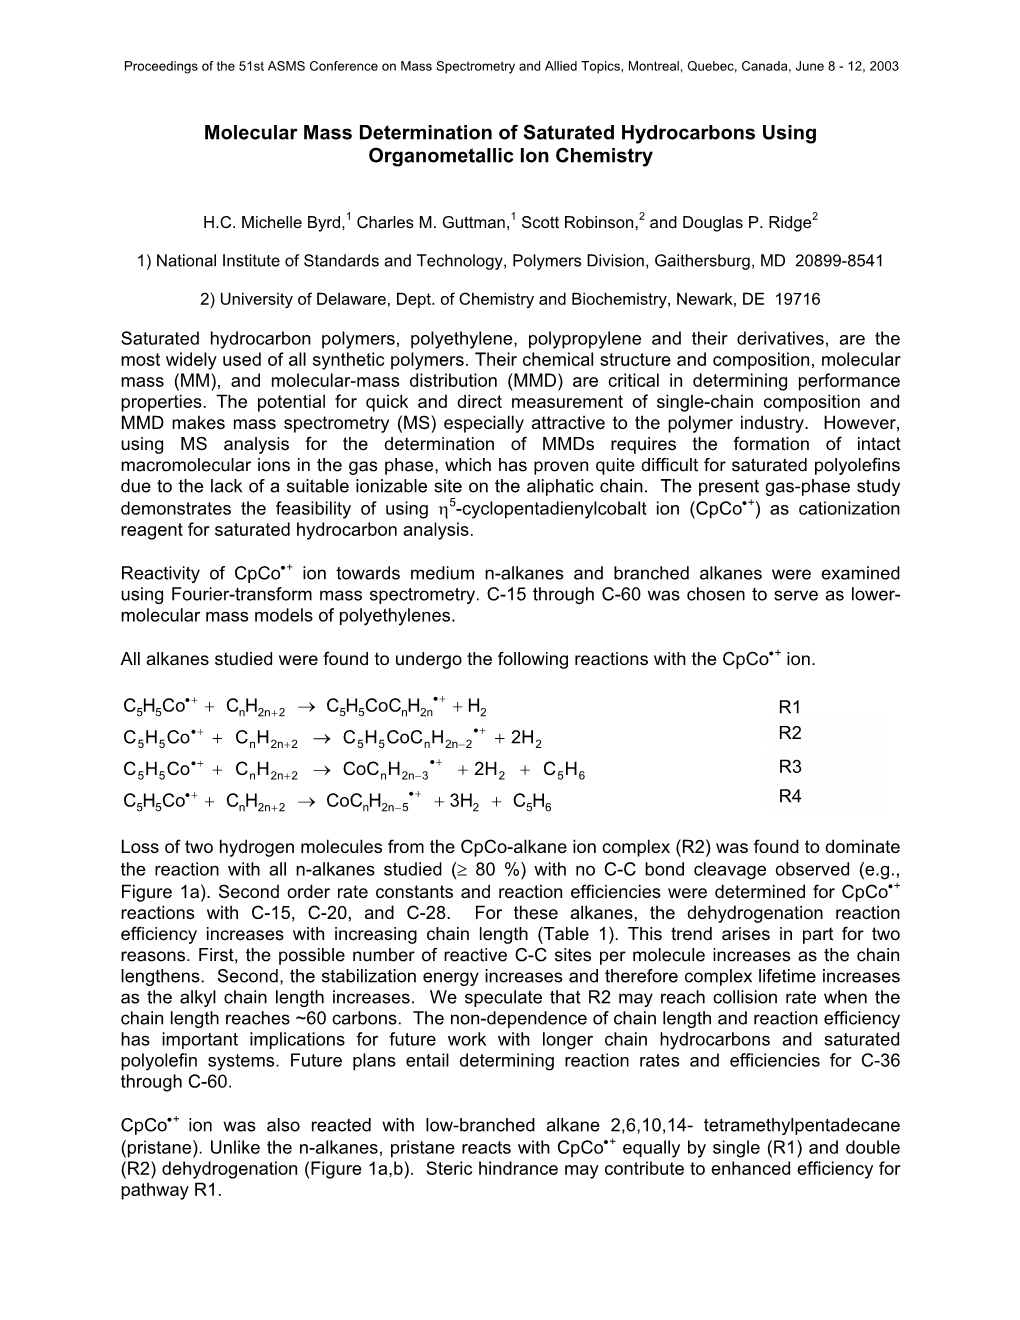 Molecular Mass Determination of Saturated Hydrocarbons Using Organometallic Ion Chemistry